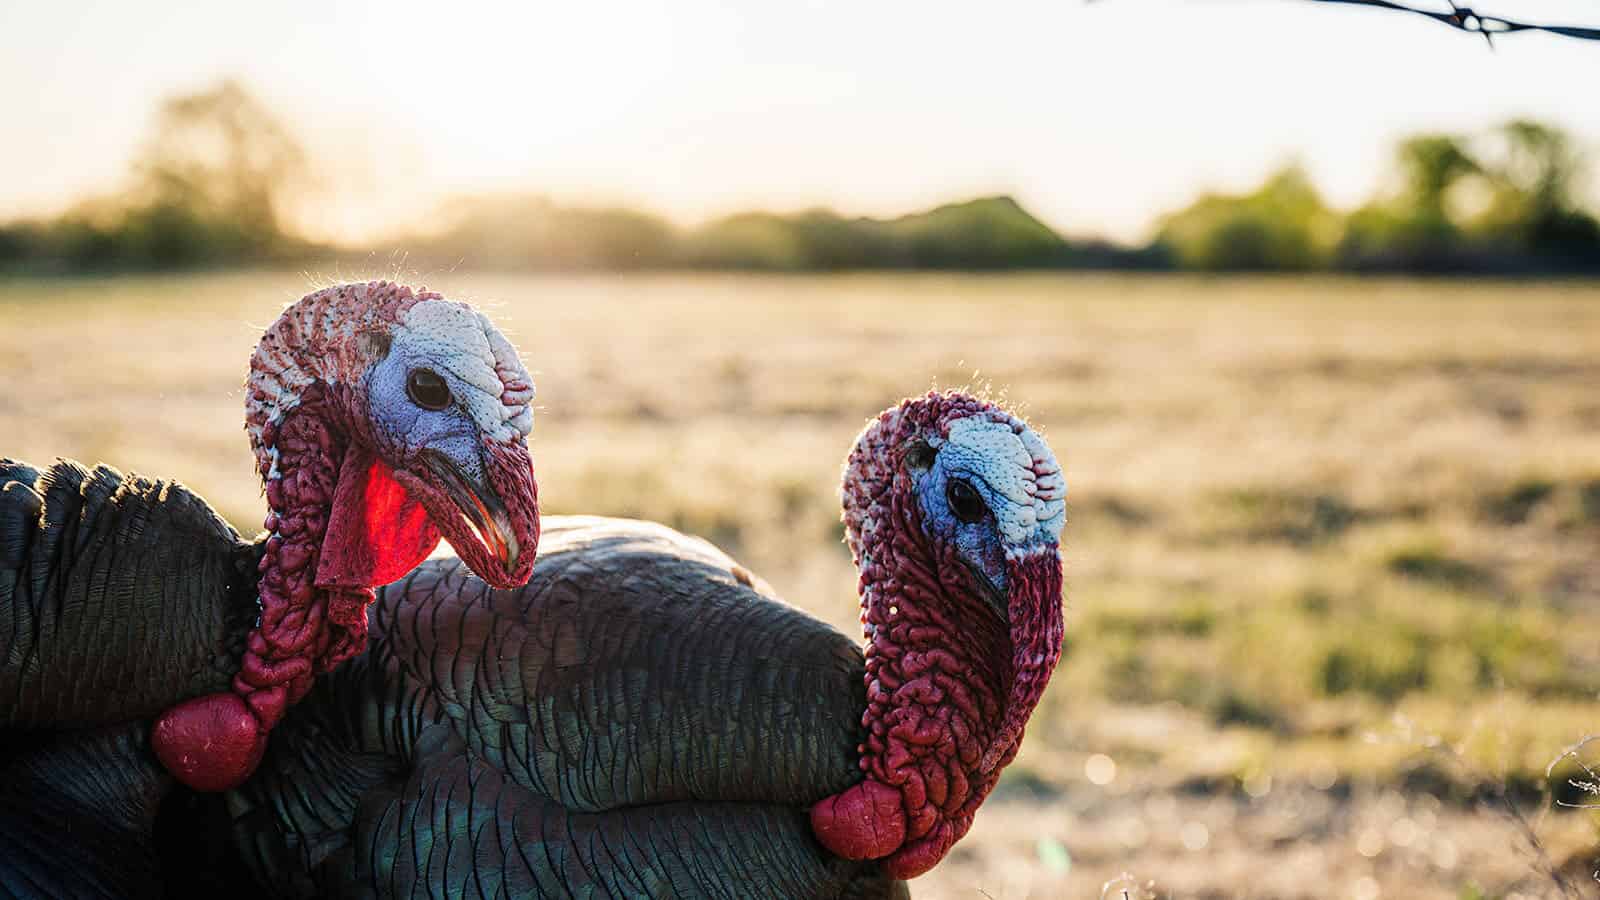 Turkey Hunting 101 - Some Rules and Laws About Wild Turkeys Hunting